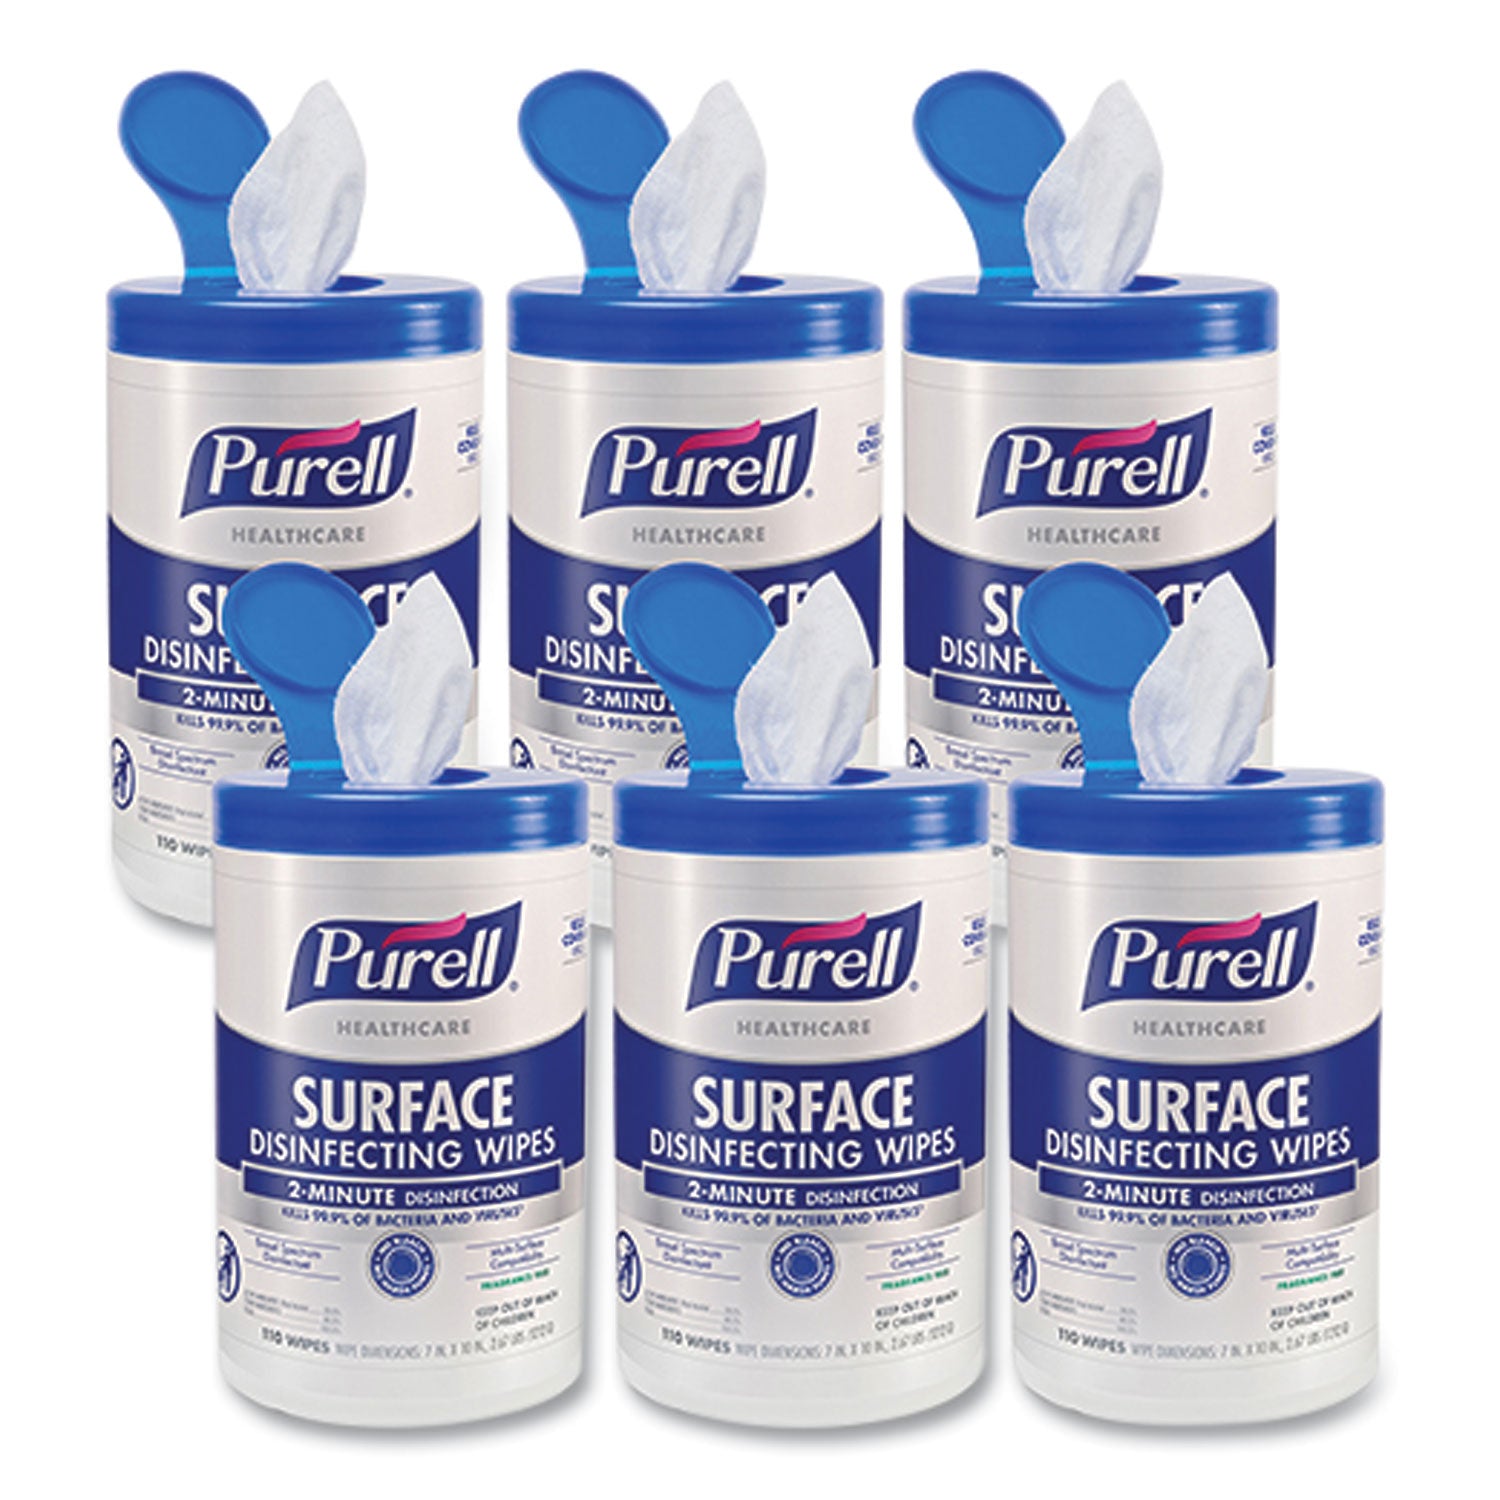 healthcare-surface-disinfecting-wipes-1-ply-7-x-10-unscented-white-110-wipes-canister-6-canisters-carton_goj934006 - 2